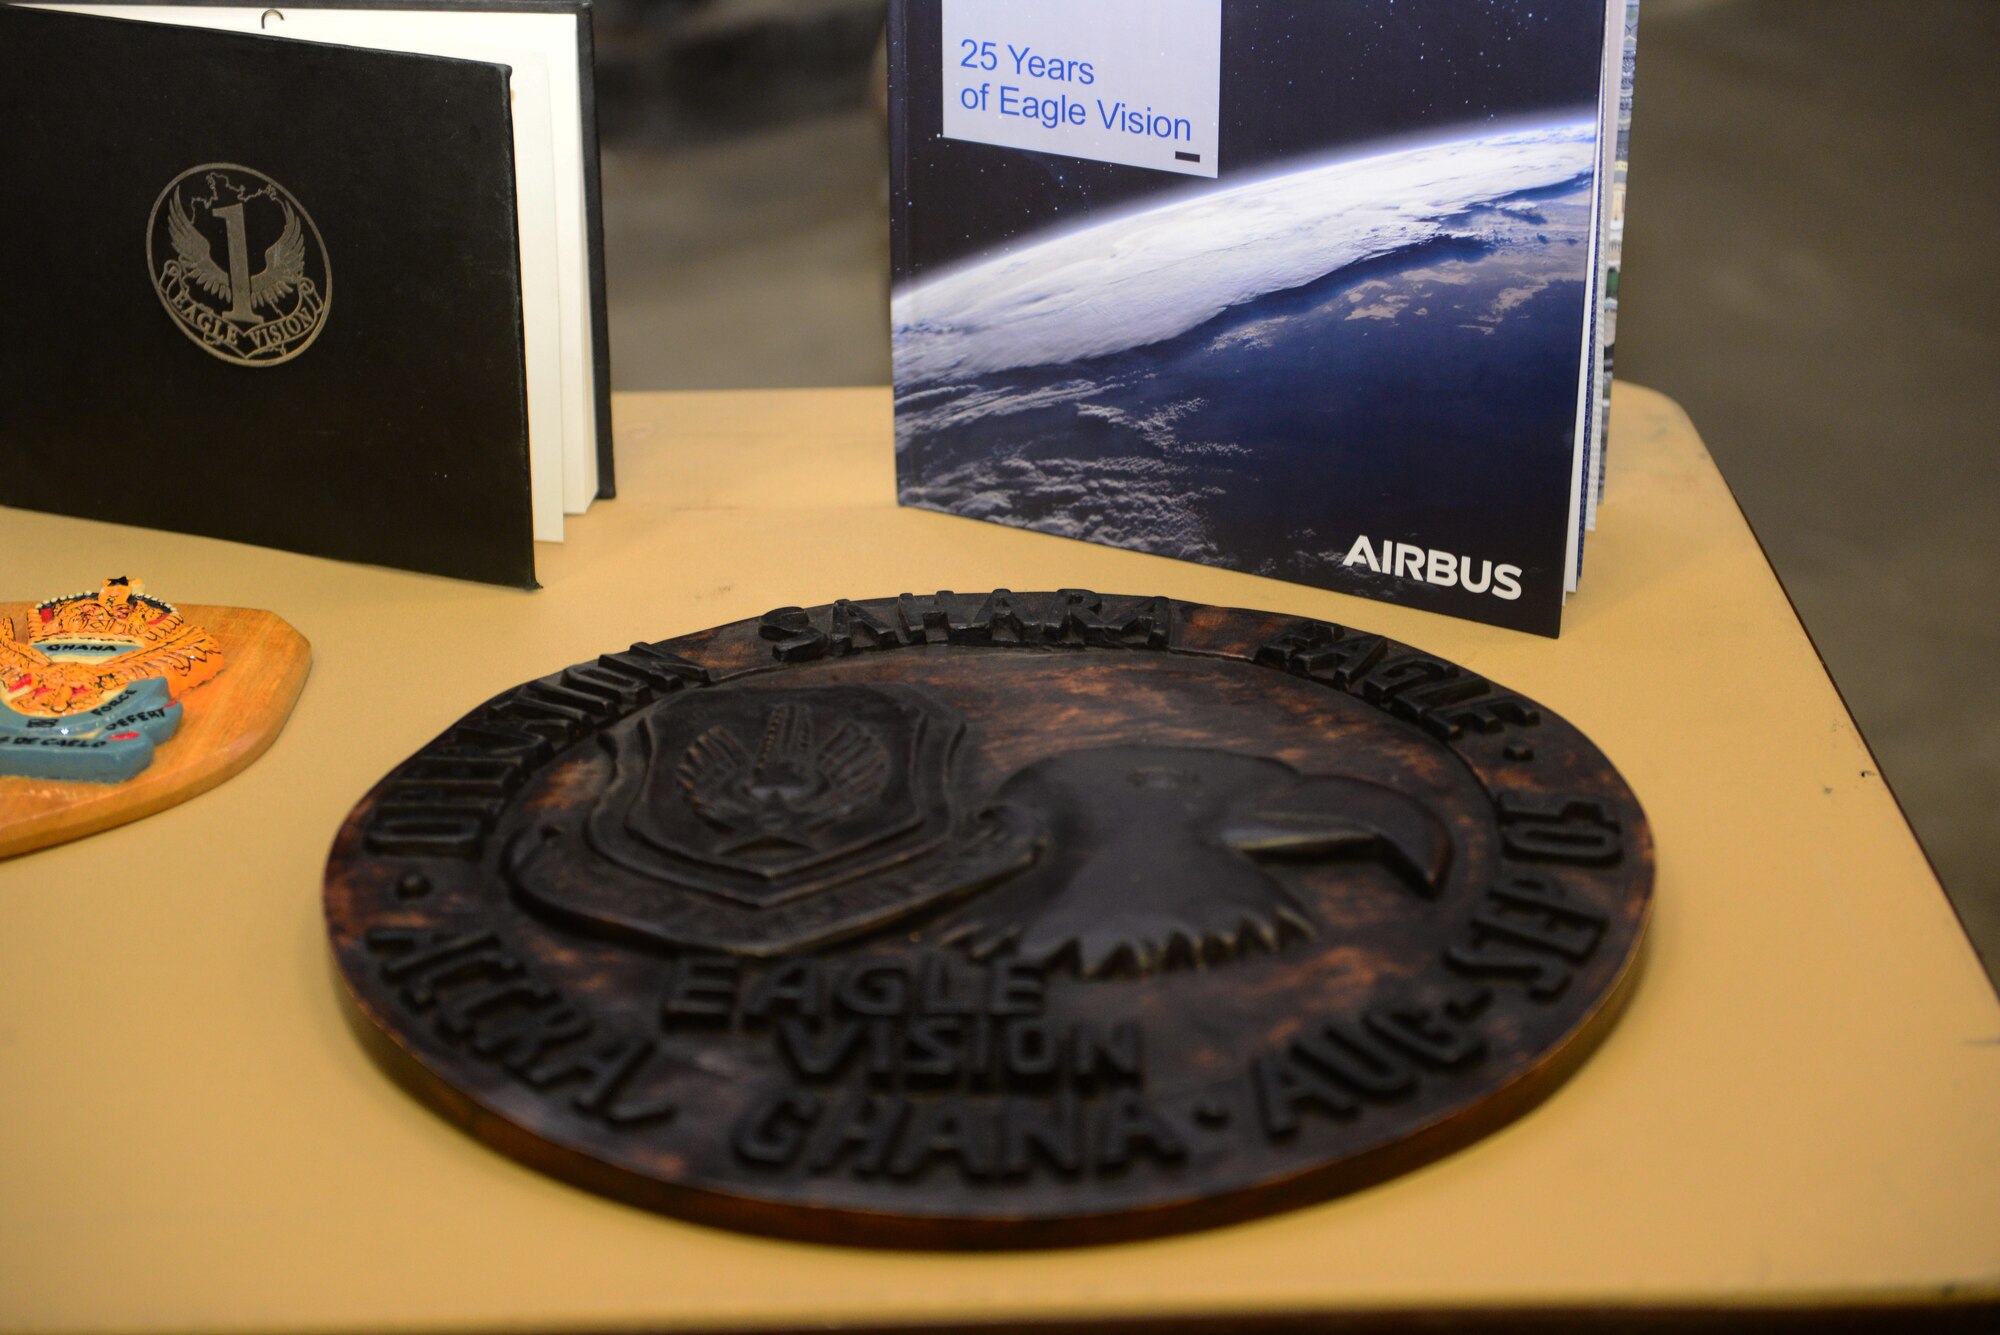 A wooden plaque, memorializing Eagle Vision One in Ghana, lays on a table during a sunset ceremony at Ramstein Air Base, Germany, Jan. 28, 2020. Eagle Vision One used satellite imagery to support operations as well as aiding allies during natural disasters. (U.S. Air Force photo by Airman 1st Class Manuel Zamora)